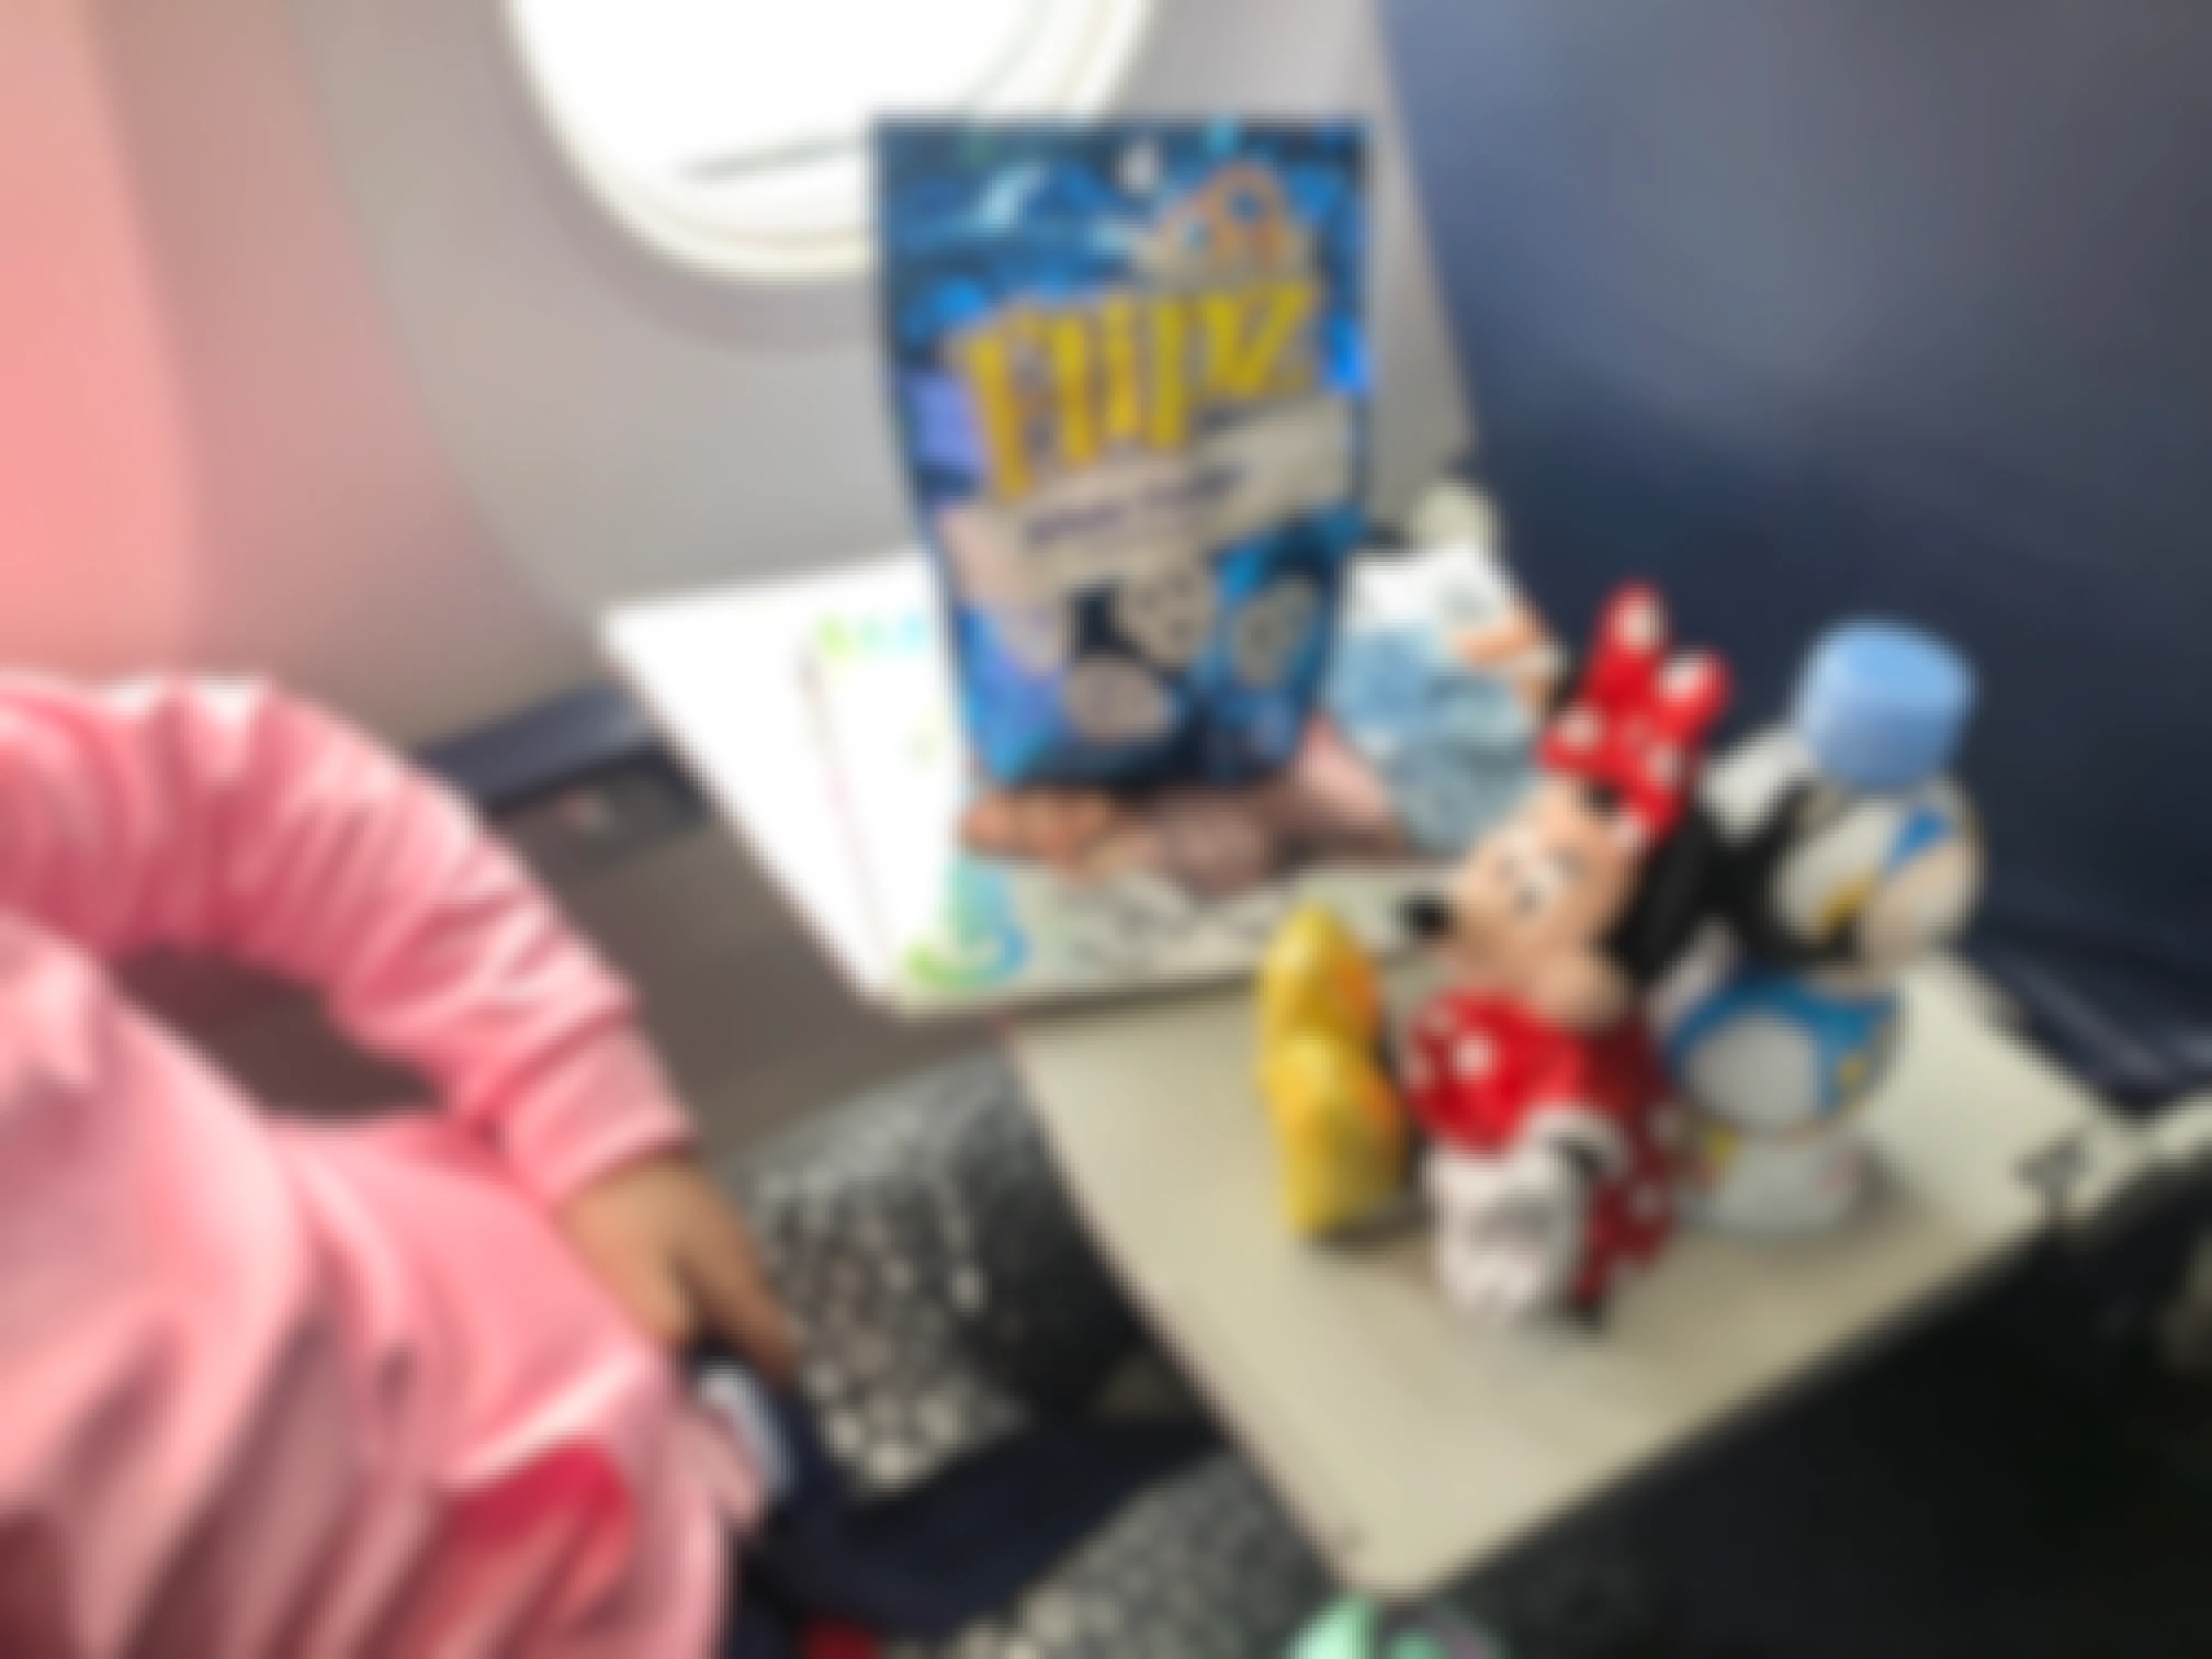 A girl sits in an airplane with a Mini mouse doll and snacks on her tray table.